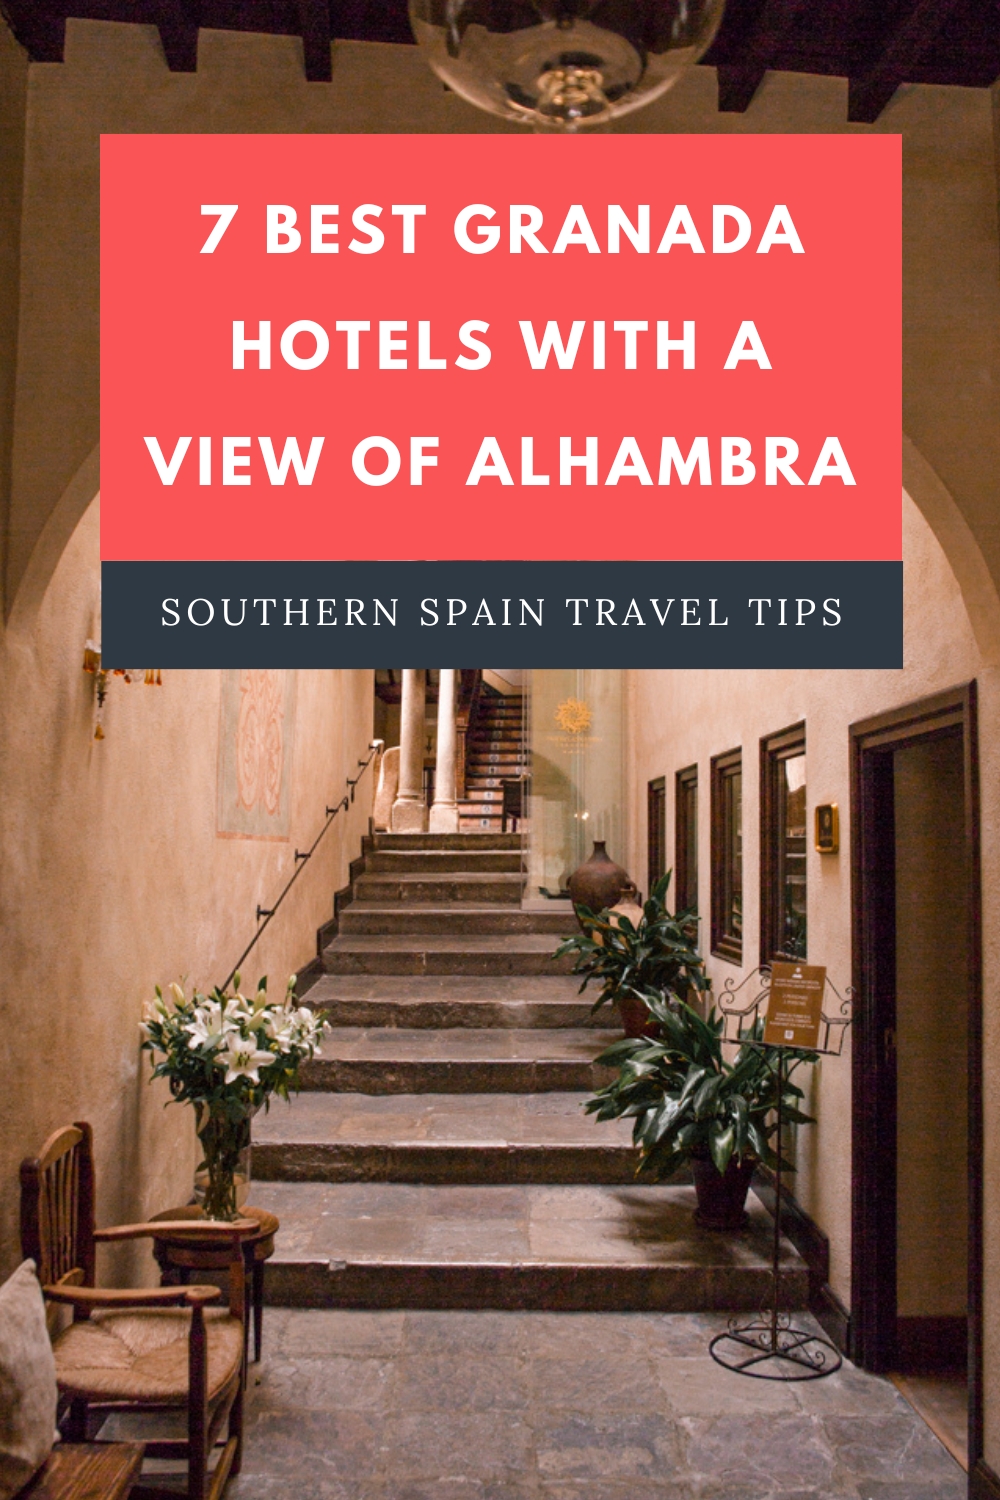 pinterest images for an article about best hotels in Granada with Alhambra views